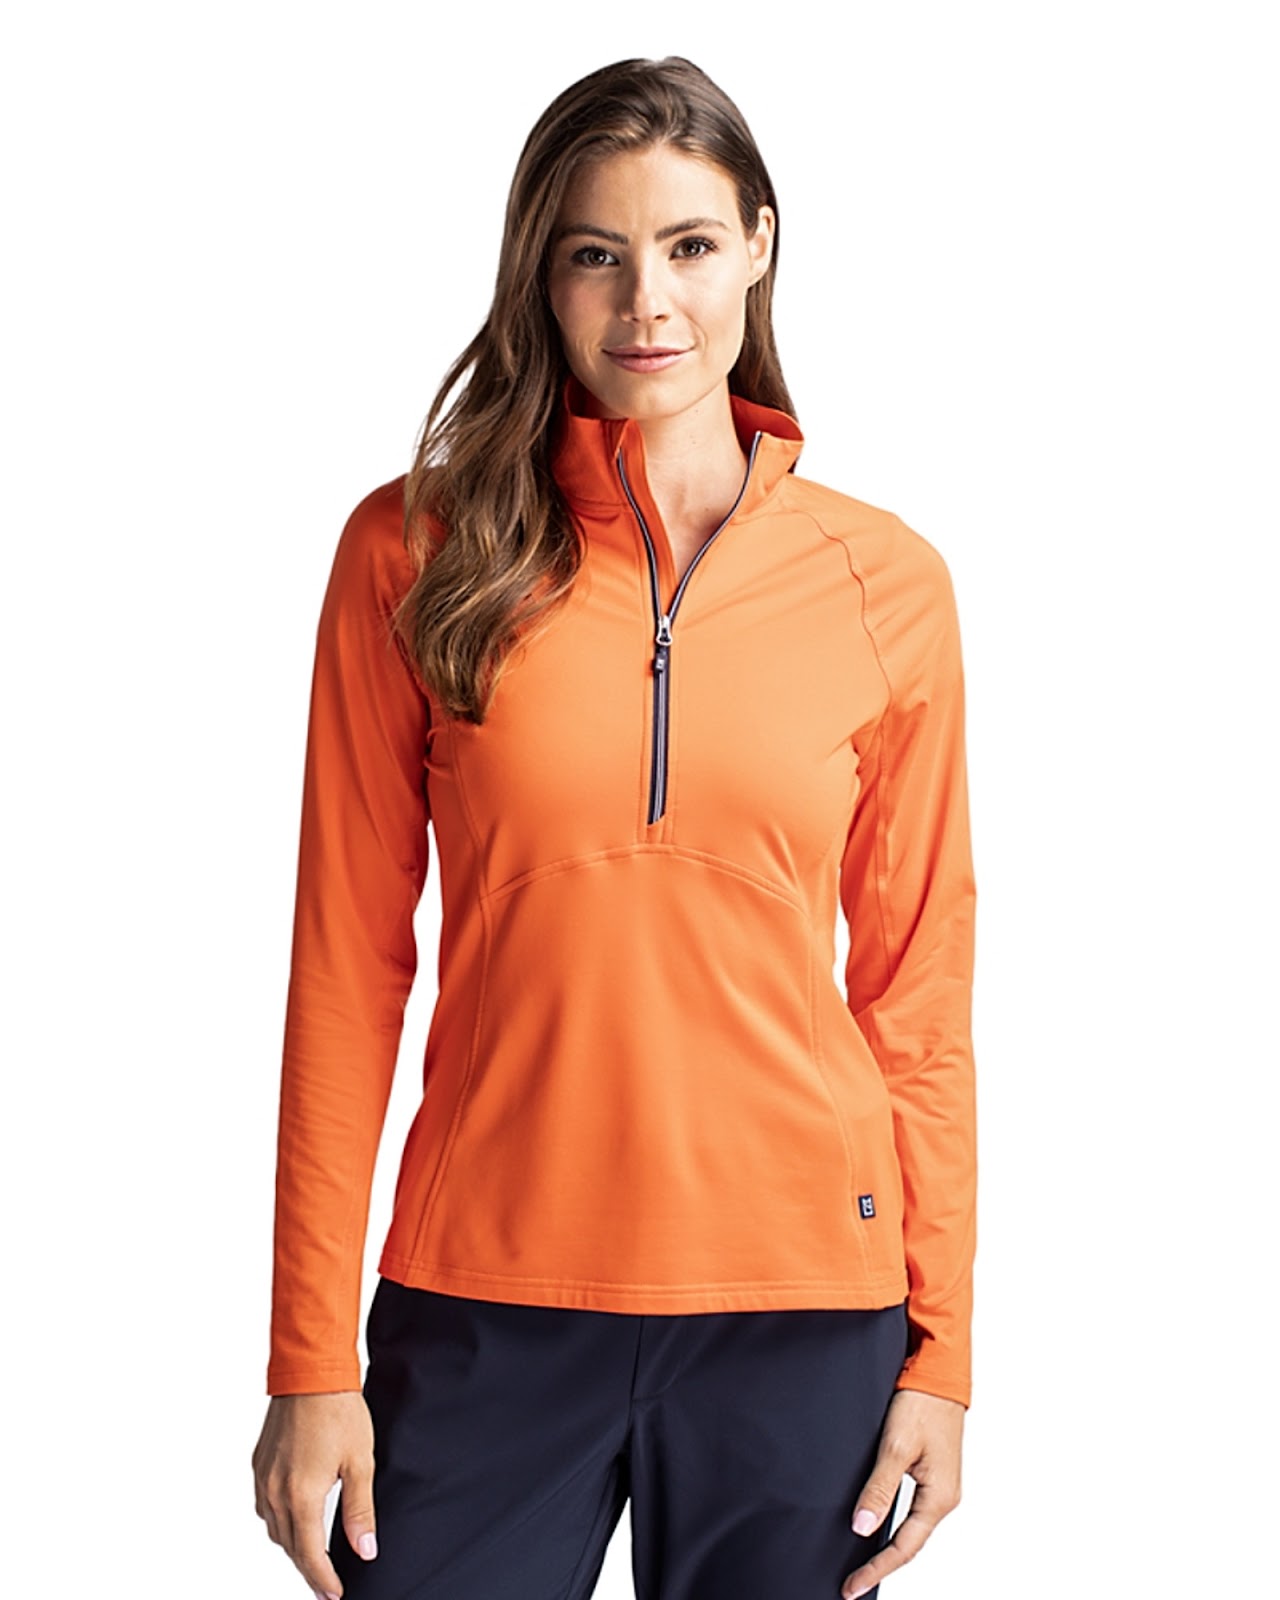 Cutter & Buck Adapt Eco Knit Stretch Recycled Womens Half Zip Pullover in college orange